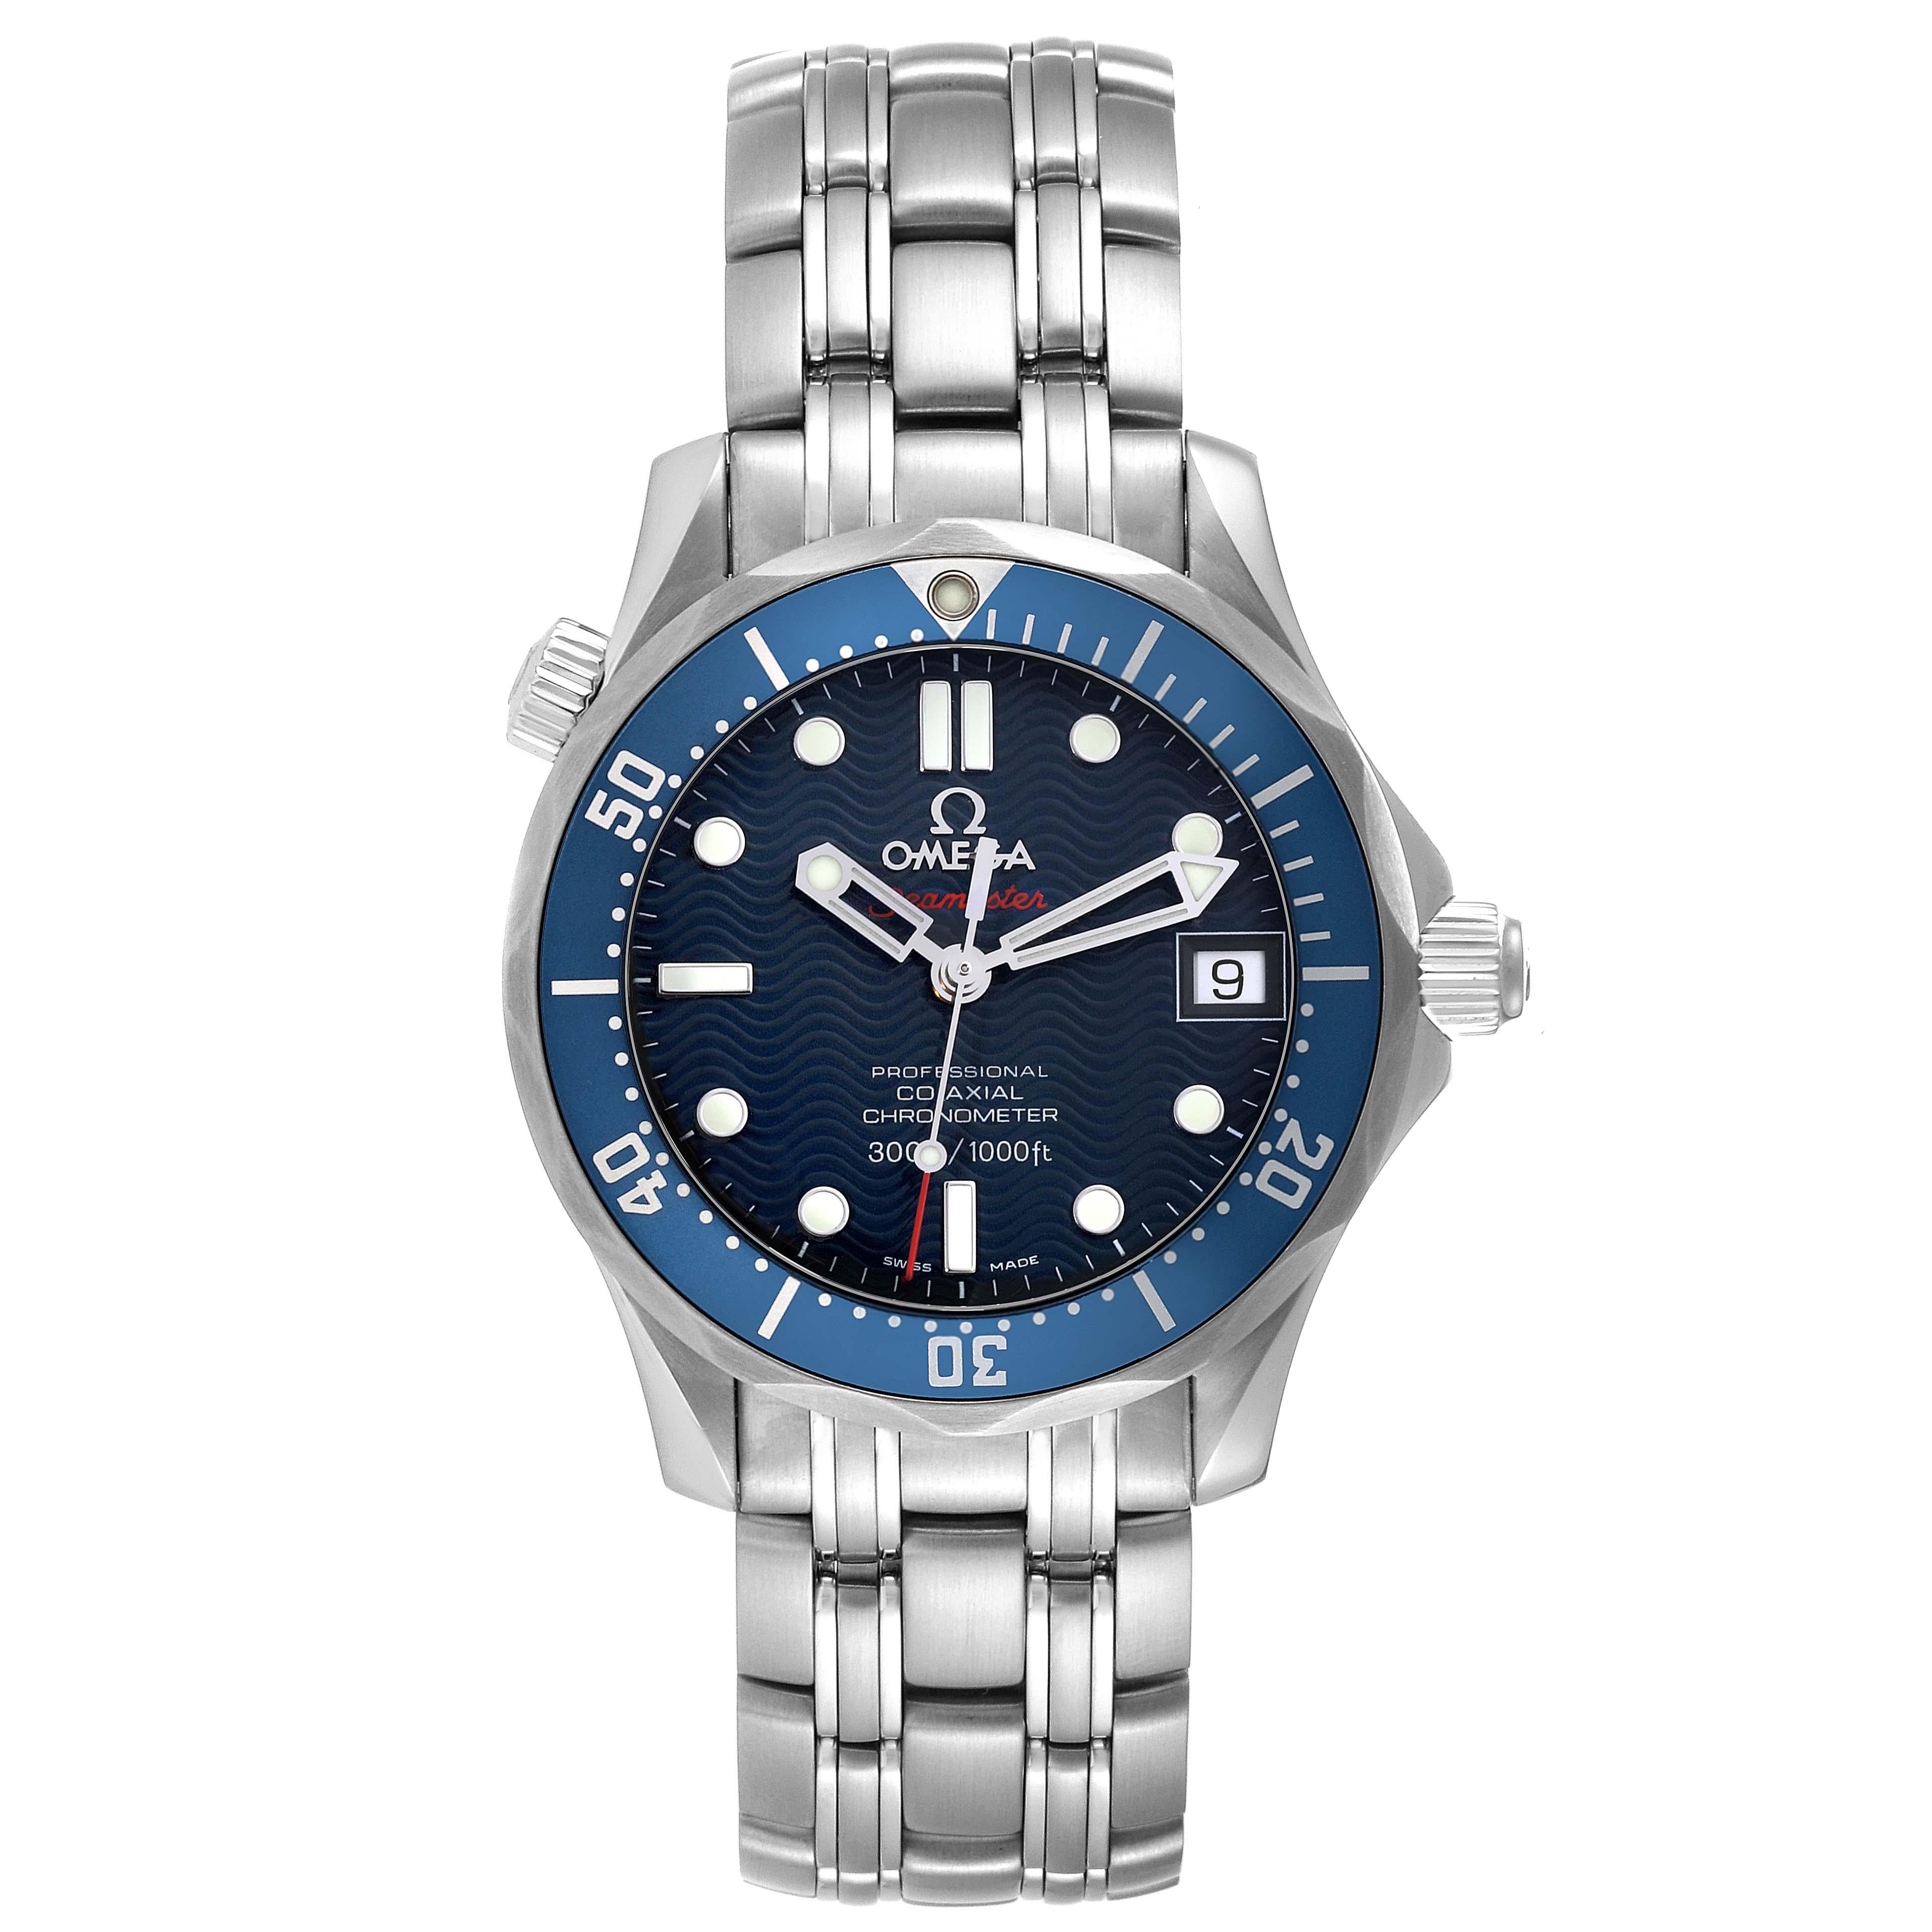 Omega Seamaster Midsize 36mm Co-Axial Steel Mens Watch 2222.80.00 Card. Automatic self-winding Co-Axial movement. Stainless steel case 36mm in diameter. Helium escape valve at 10 o'clock. Omega logo on the crown. Unidirectional rotating bezel with